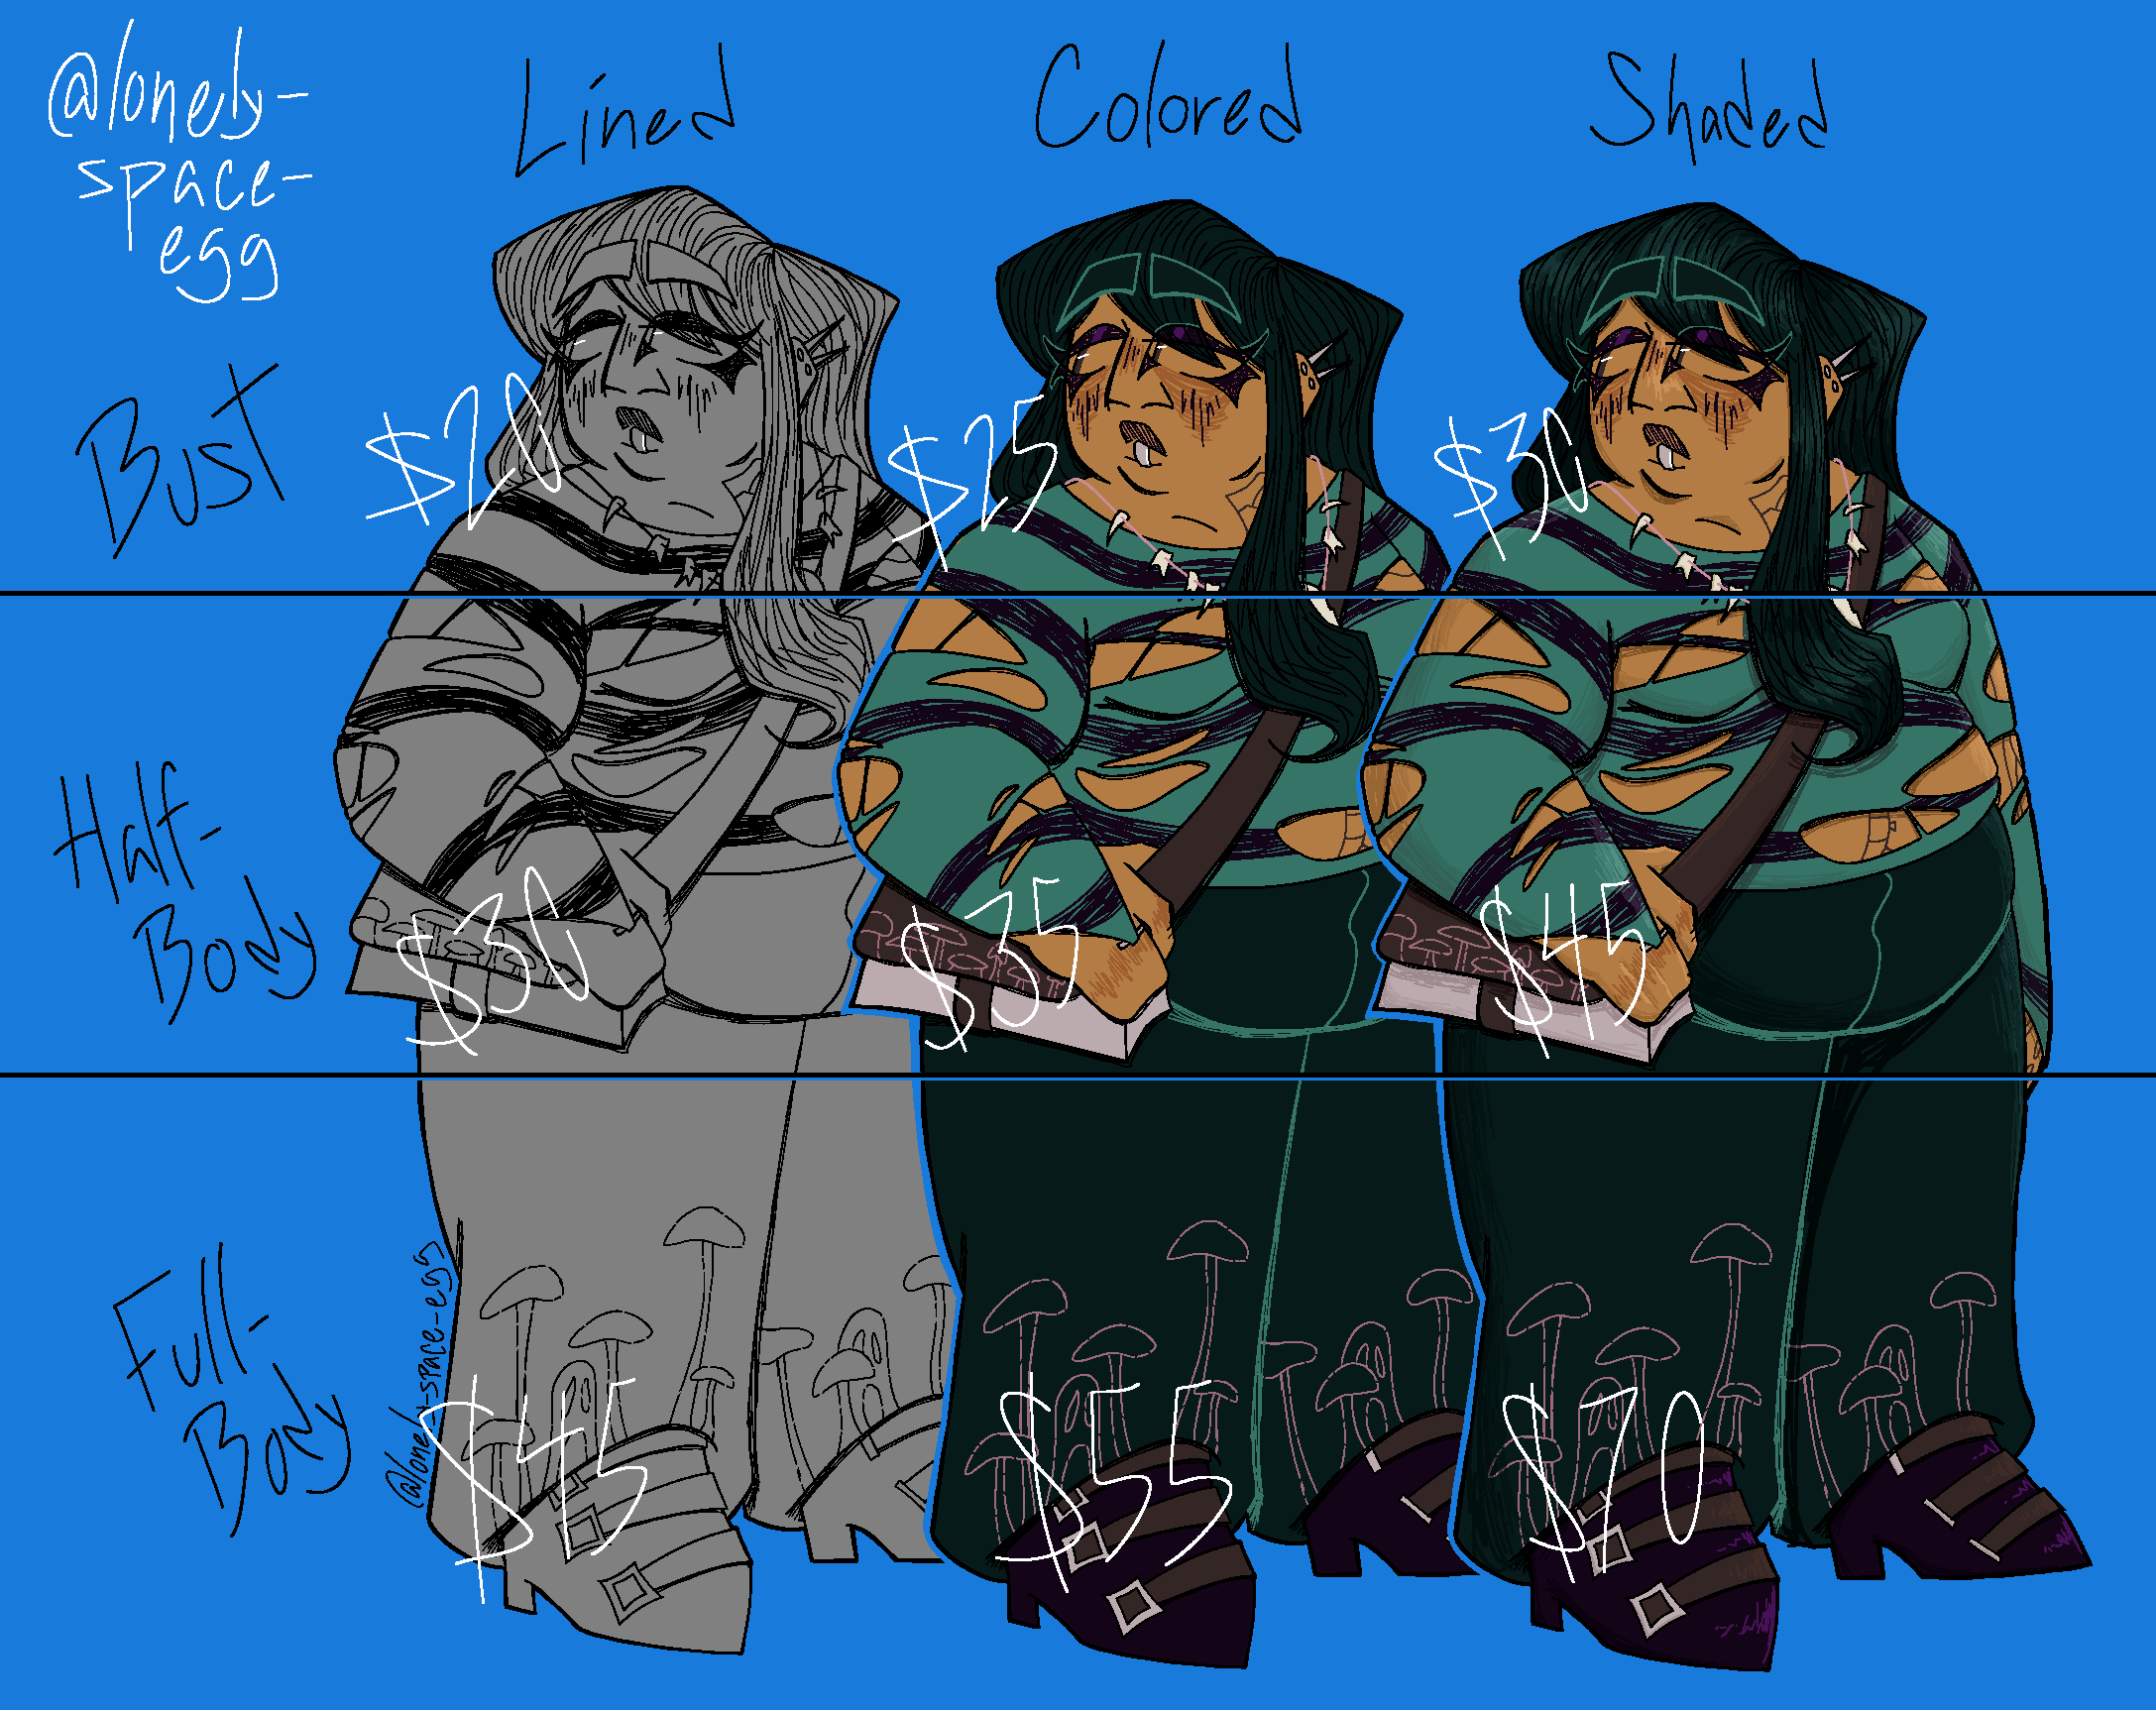 Commission price sheet with visual examples.